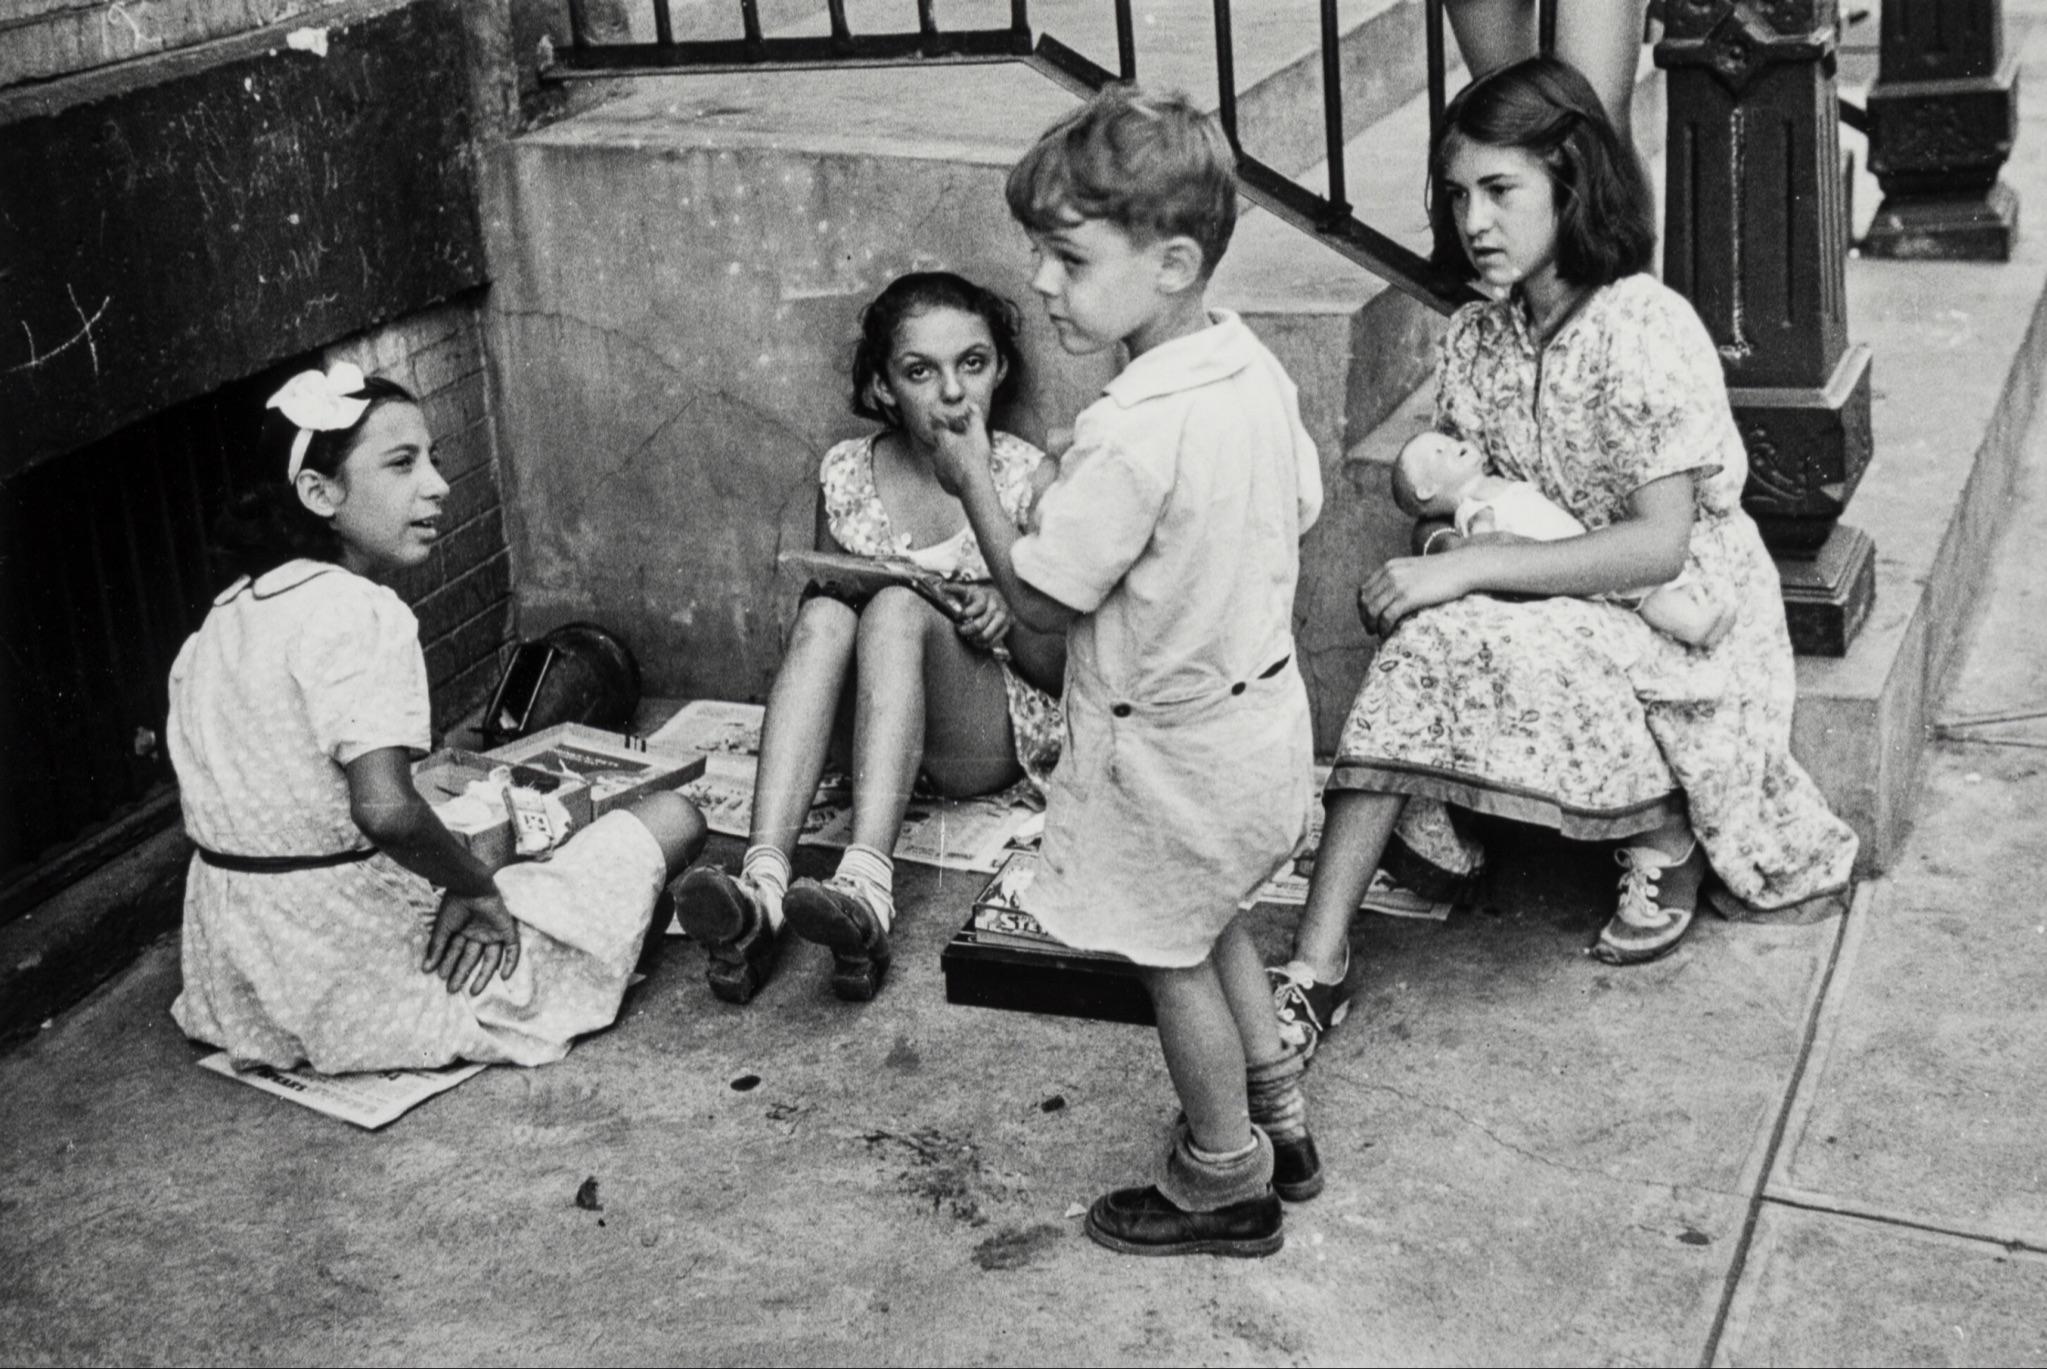 Children playing in the street (61st Street between 1st and 3rd Avenues) New York City, 1938. (Photo Walker Evans).jpg